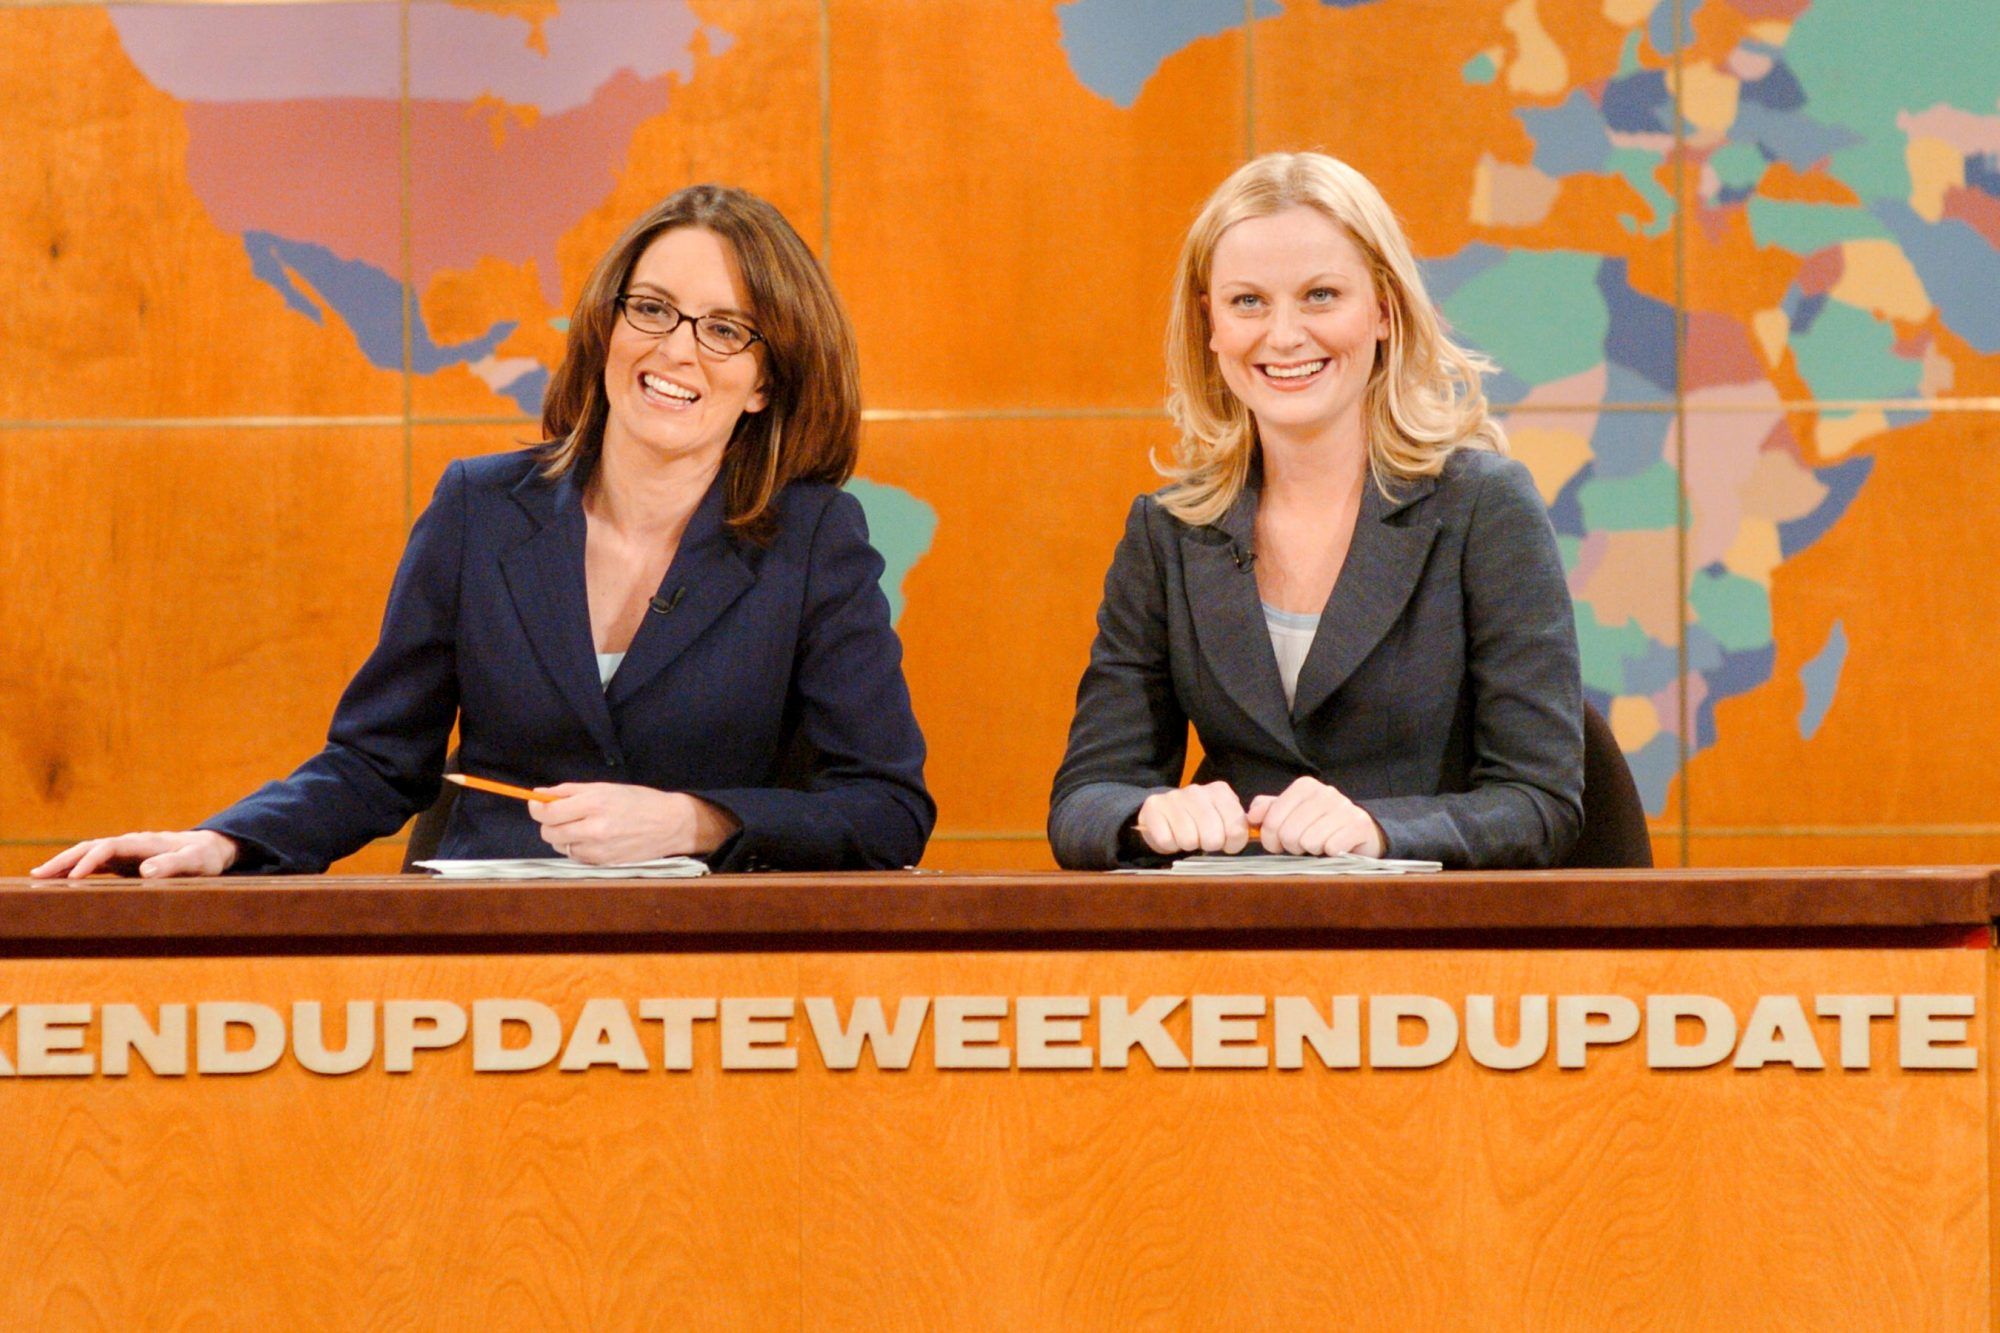 Tina Fey and Amy Poehler Hosting Weekend Update on SNL